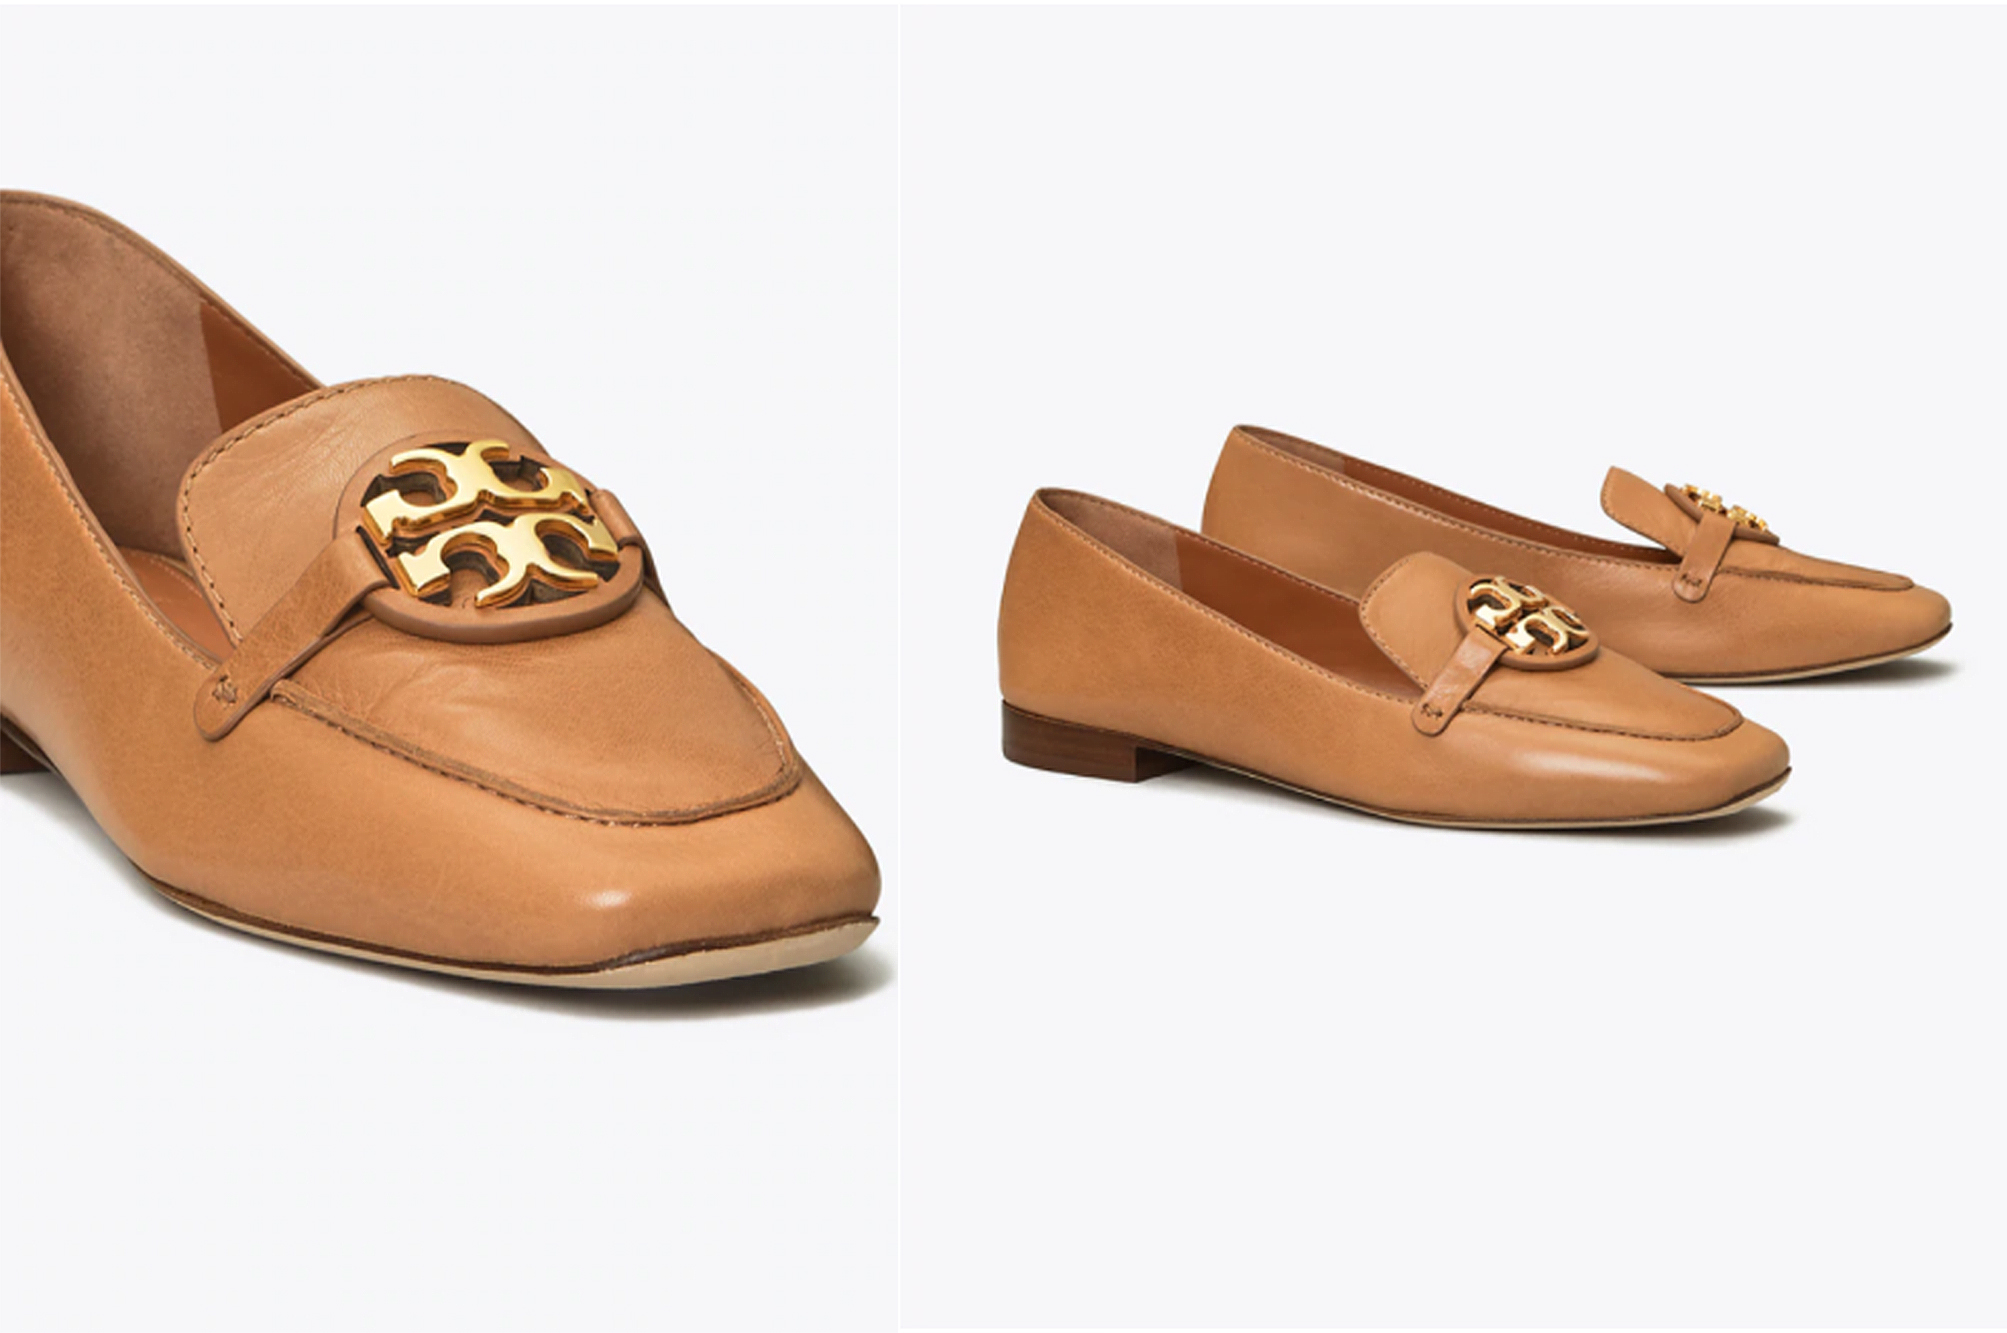 Tory Burch Chic Loafers Are on Sale 